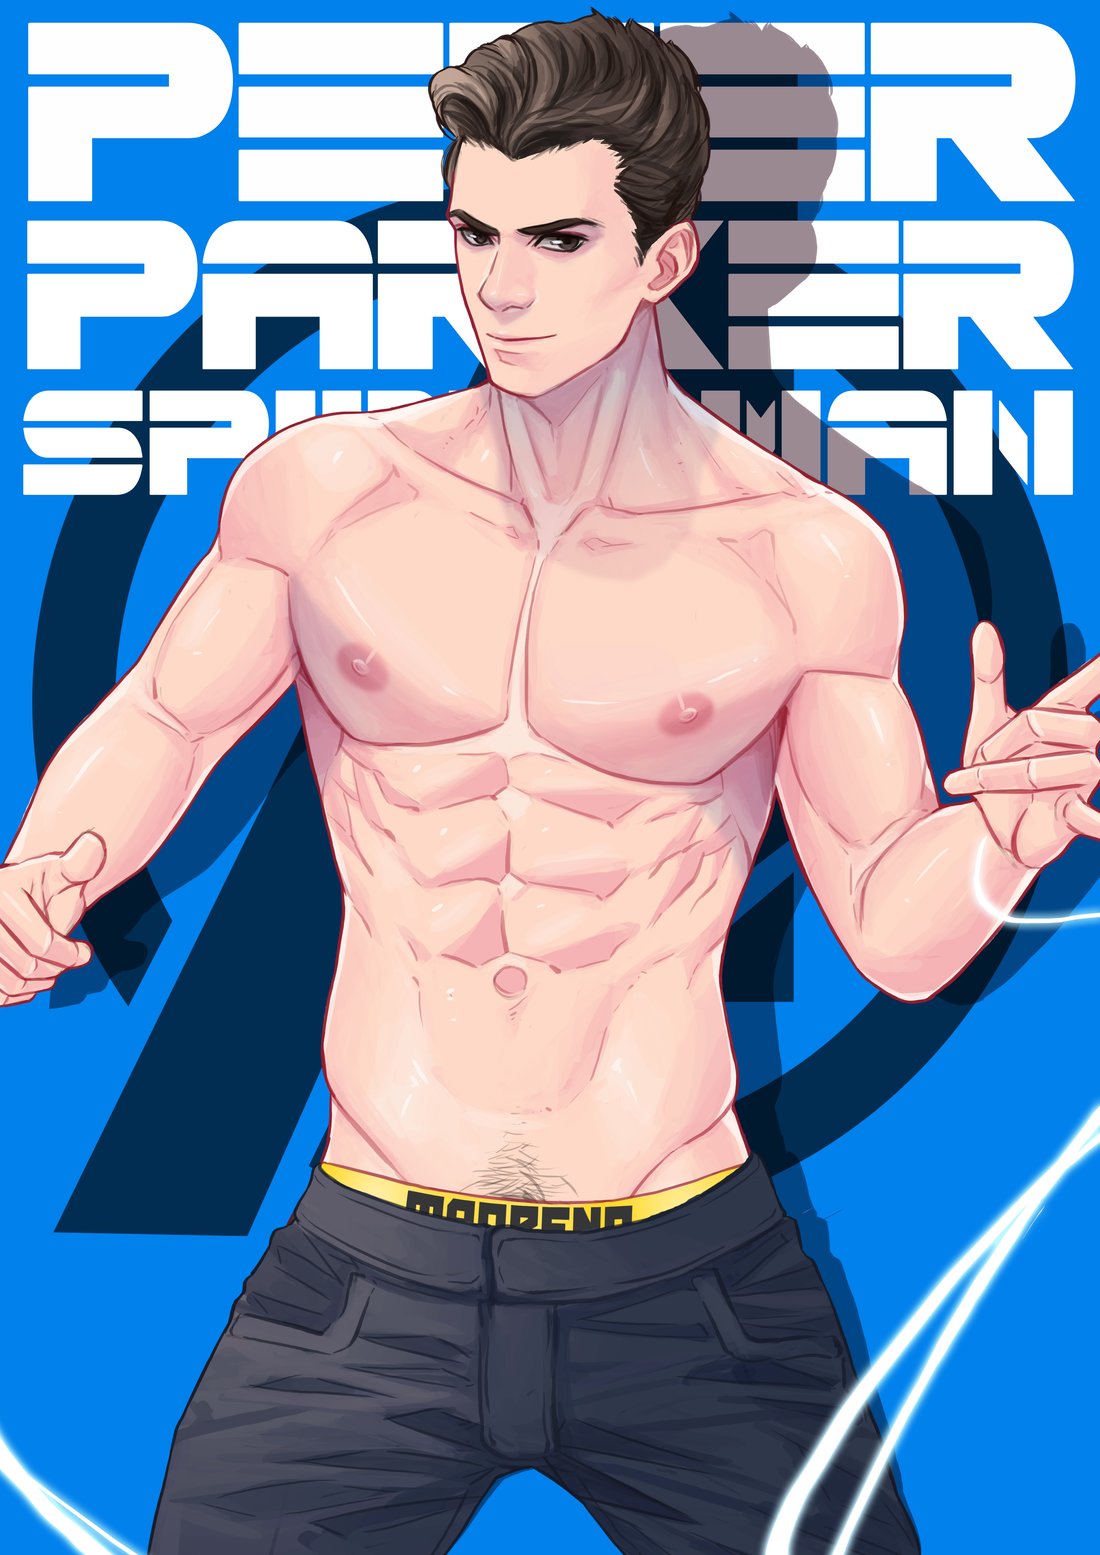 Maorenc 毛毛人 Patreon 2018 04 April Marvel's The Avengers Spiderman Peter Parker